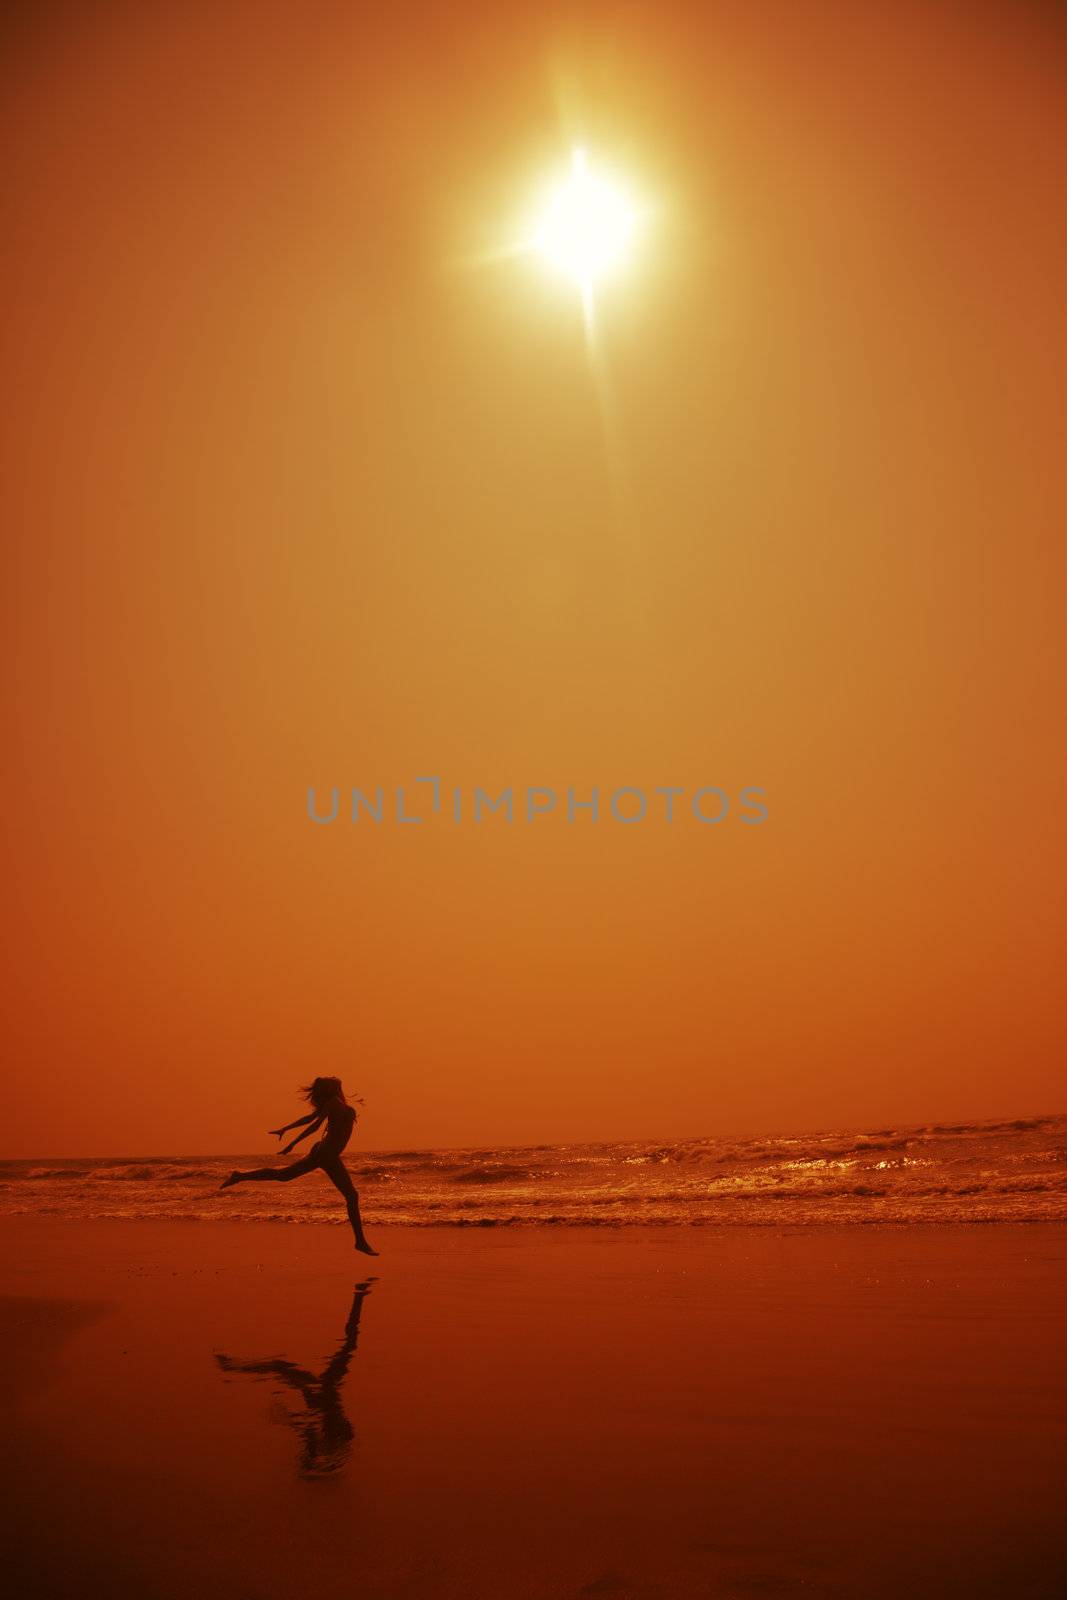 Silhouette of the lady dancing at the beach in deep dark night. Artistic orange colors toning added